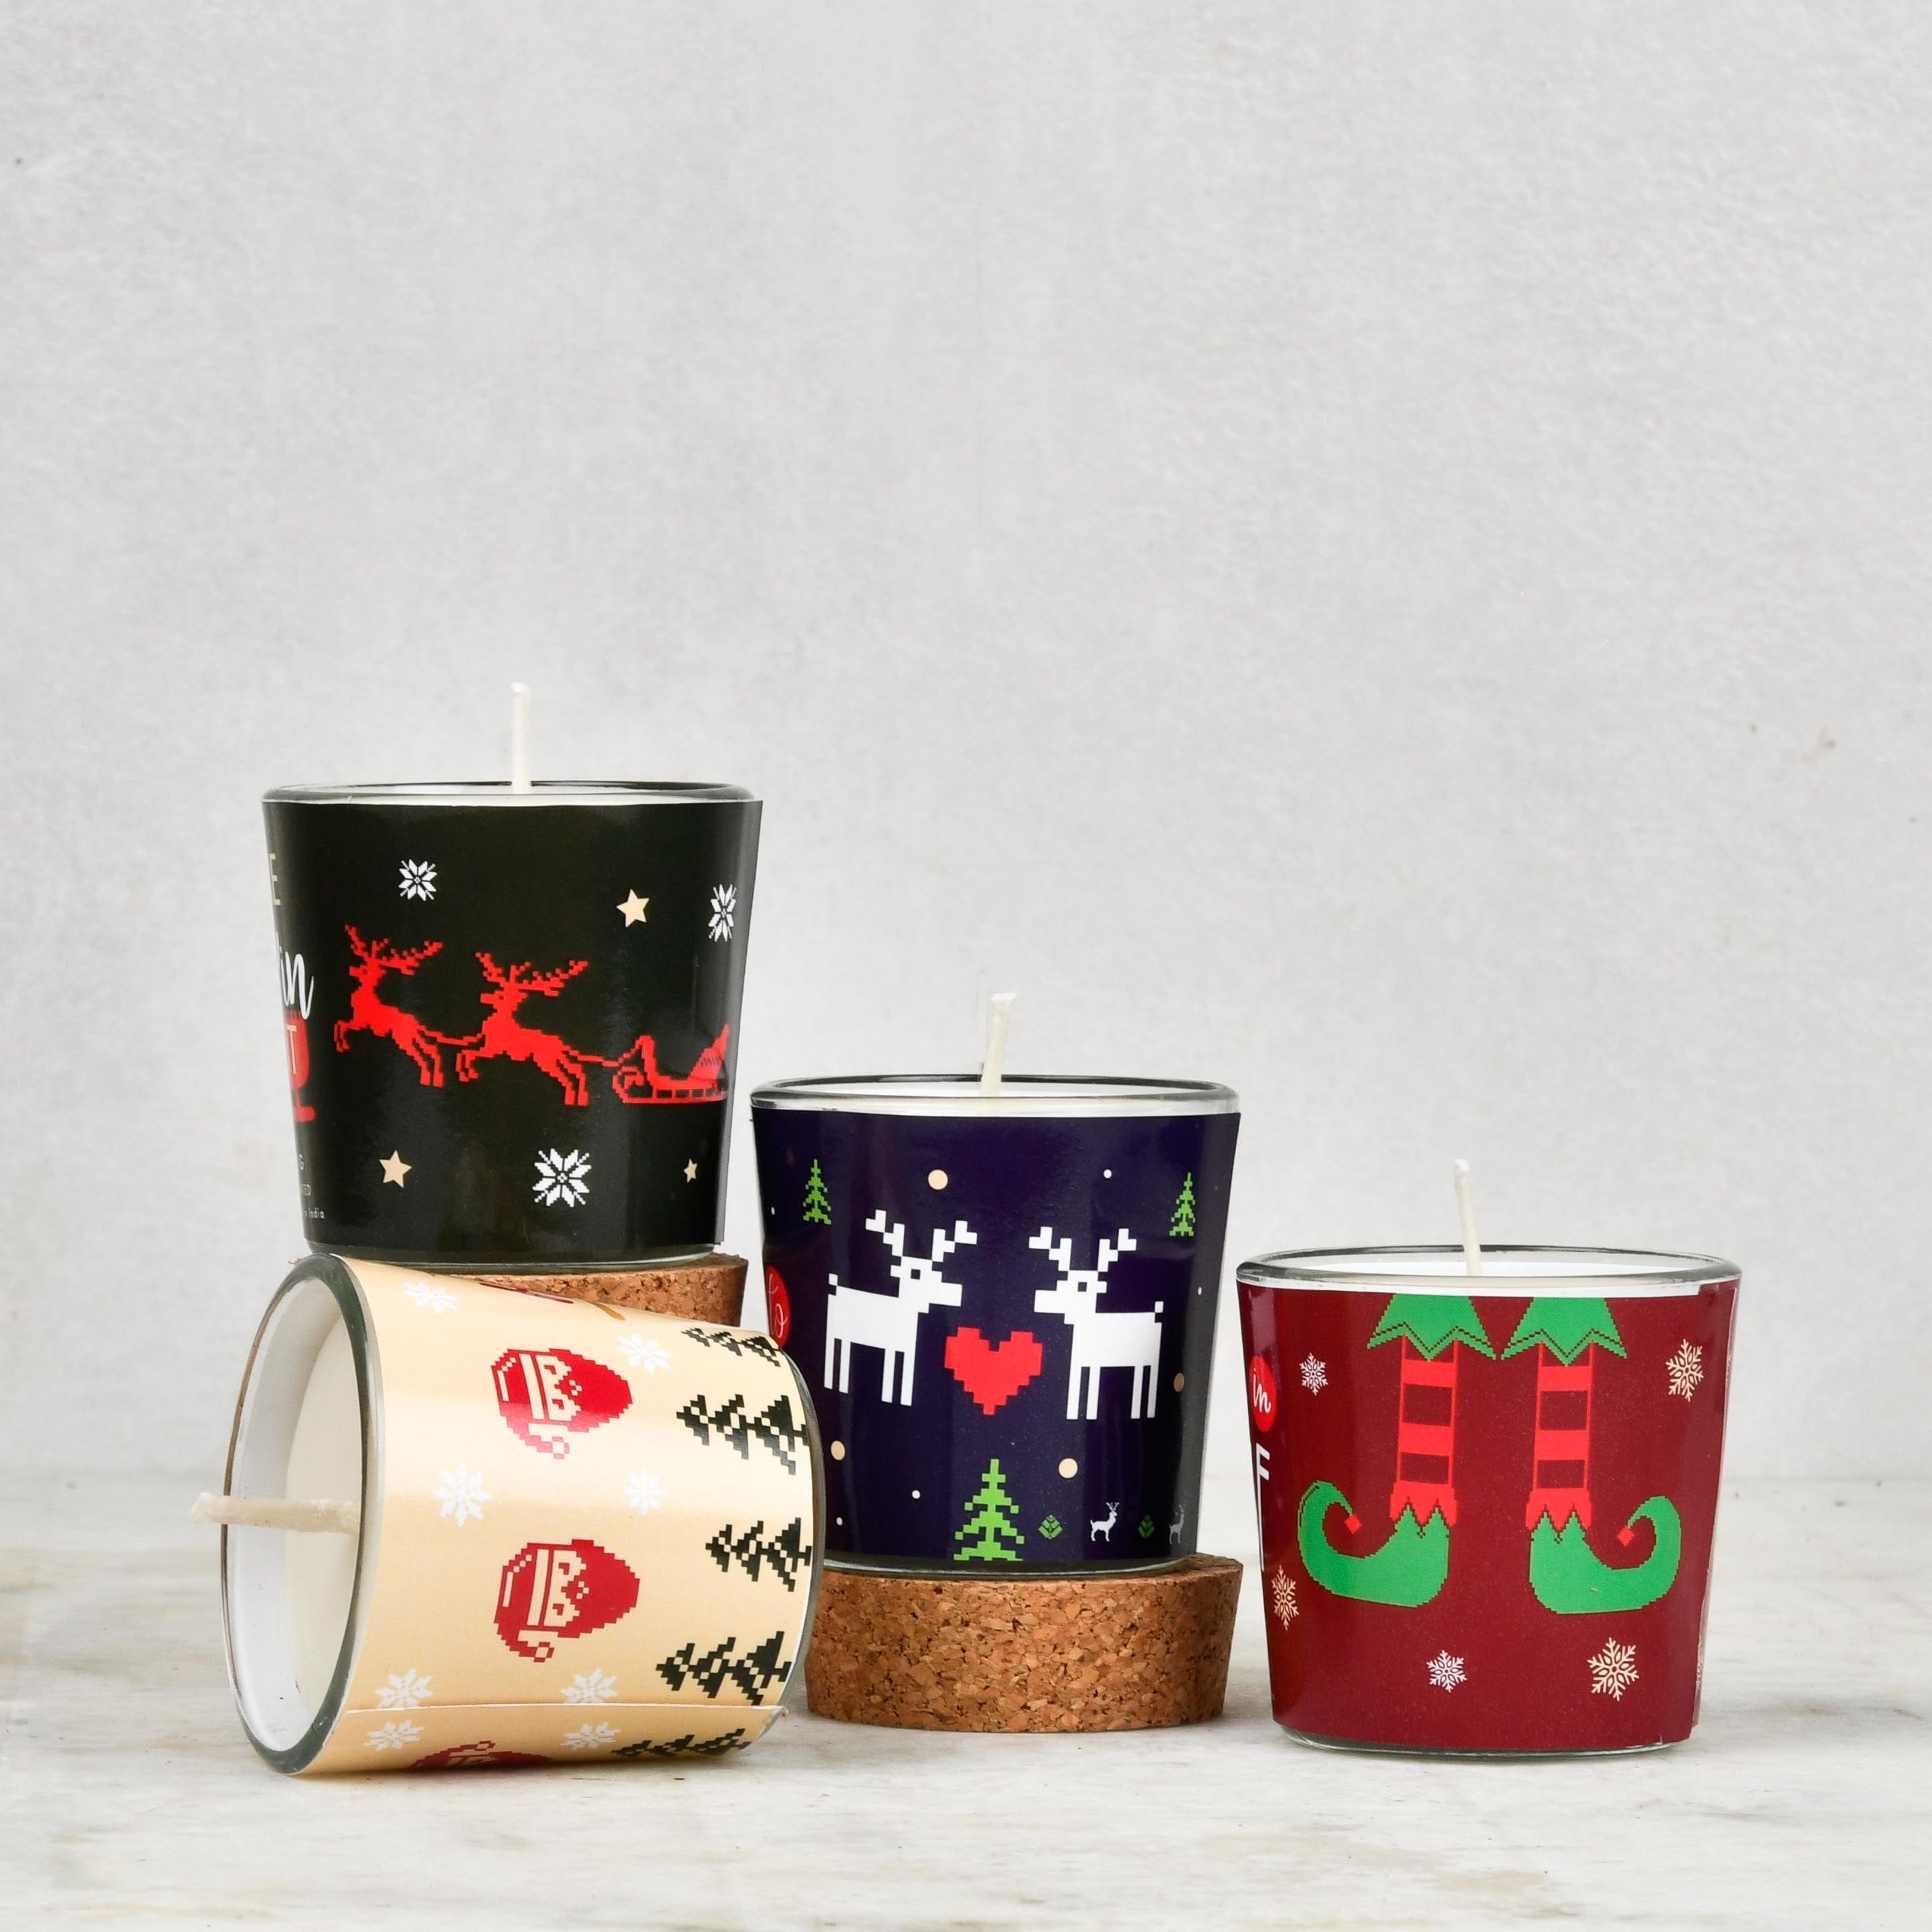 Gift Set of 4 Scented Votive Candles - Oh What Fun!